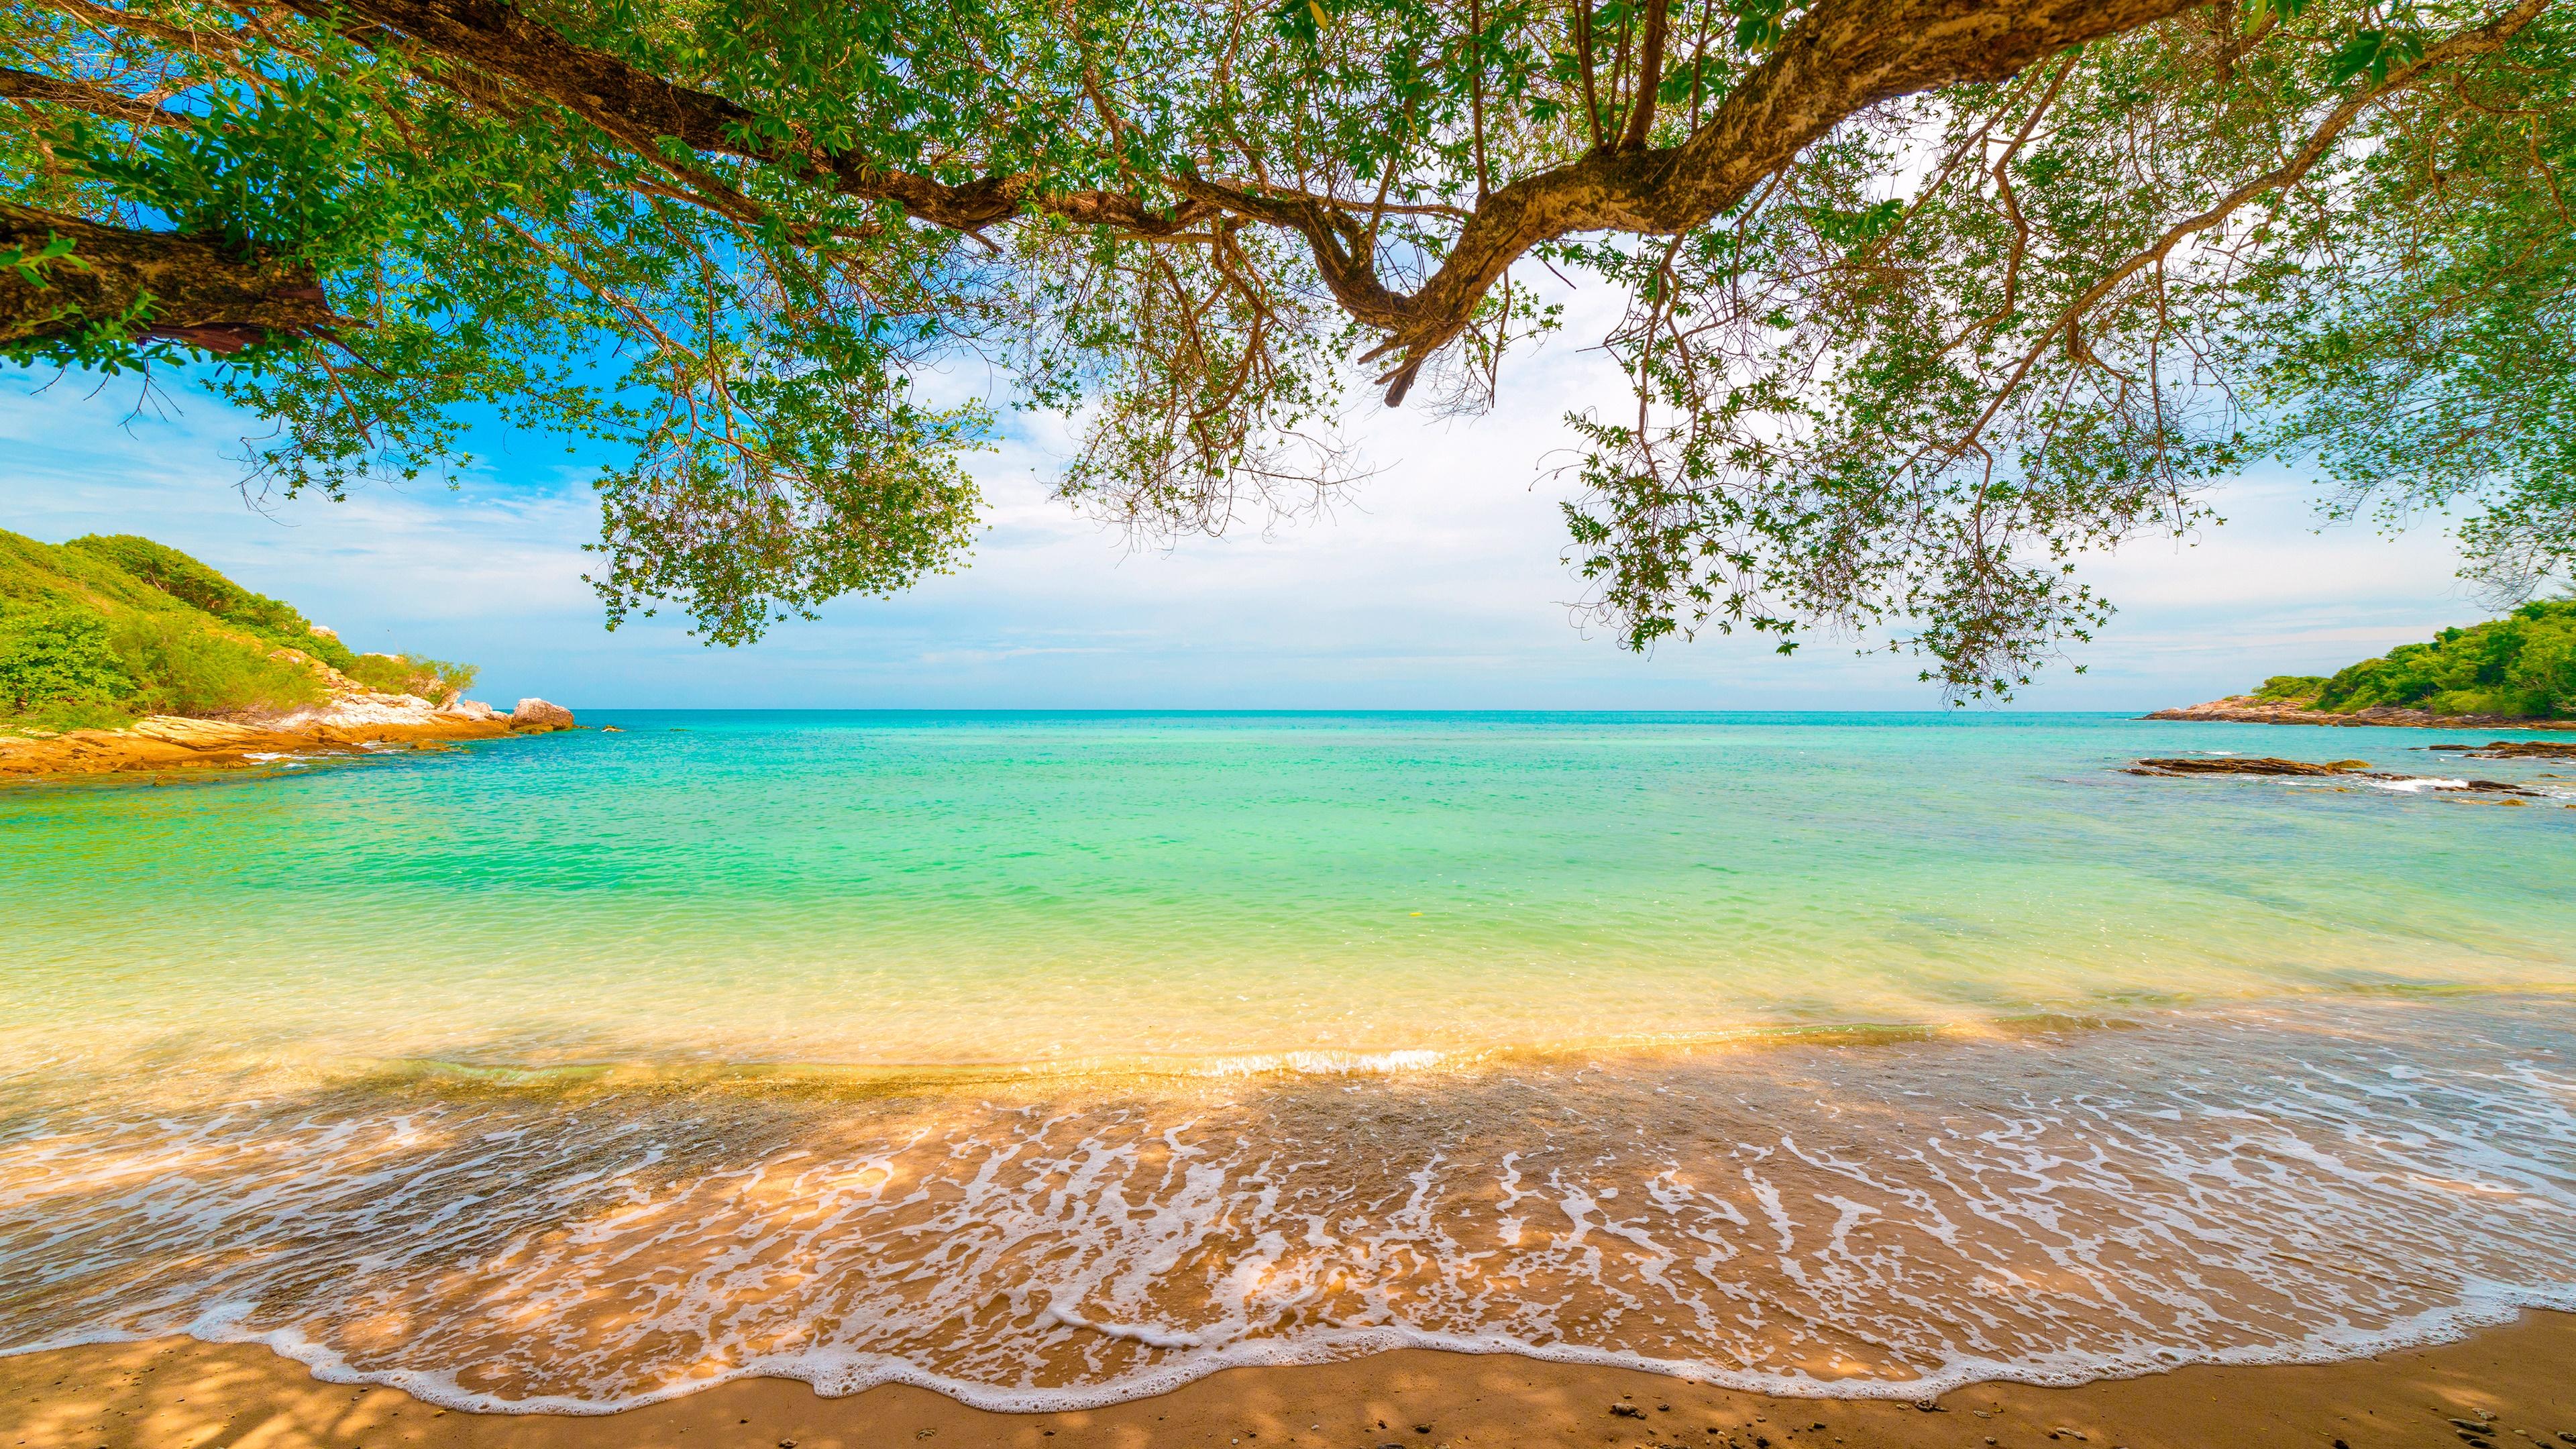 Tropical-sand-beach-Lagoon-coastline-sea-waves-turquoise-water-trees-willow-overhanged-horizon-landscape-nature-4K-Ultra-HD-Wallpapers-High-Quality.jpg